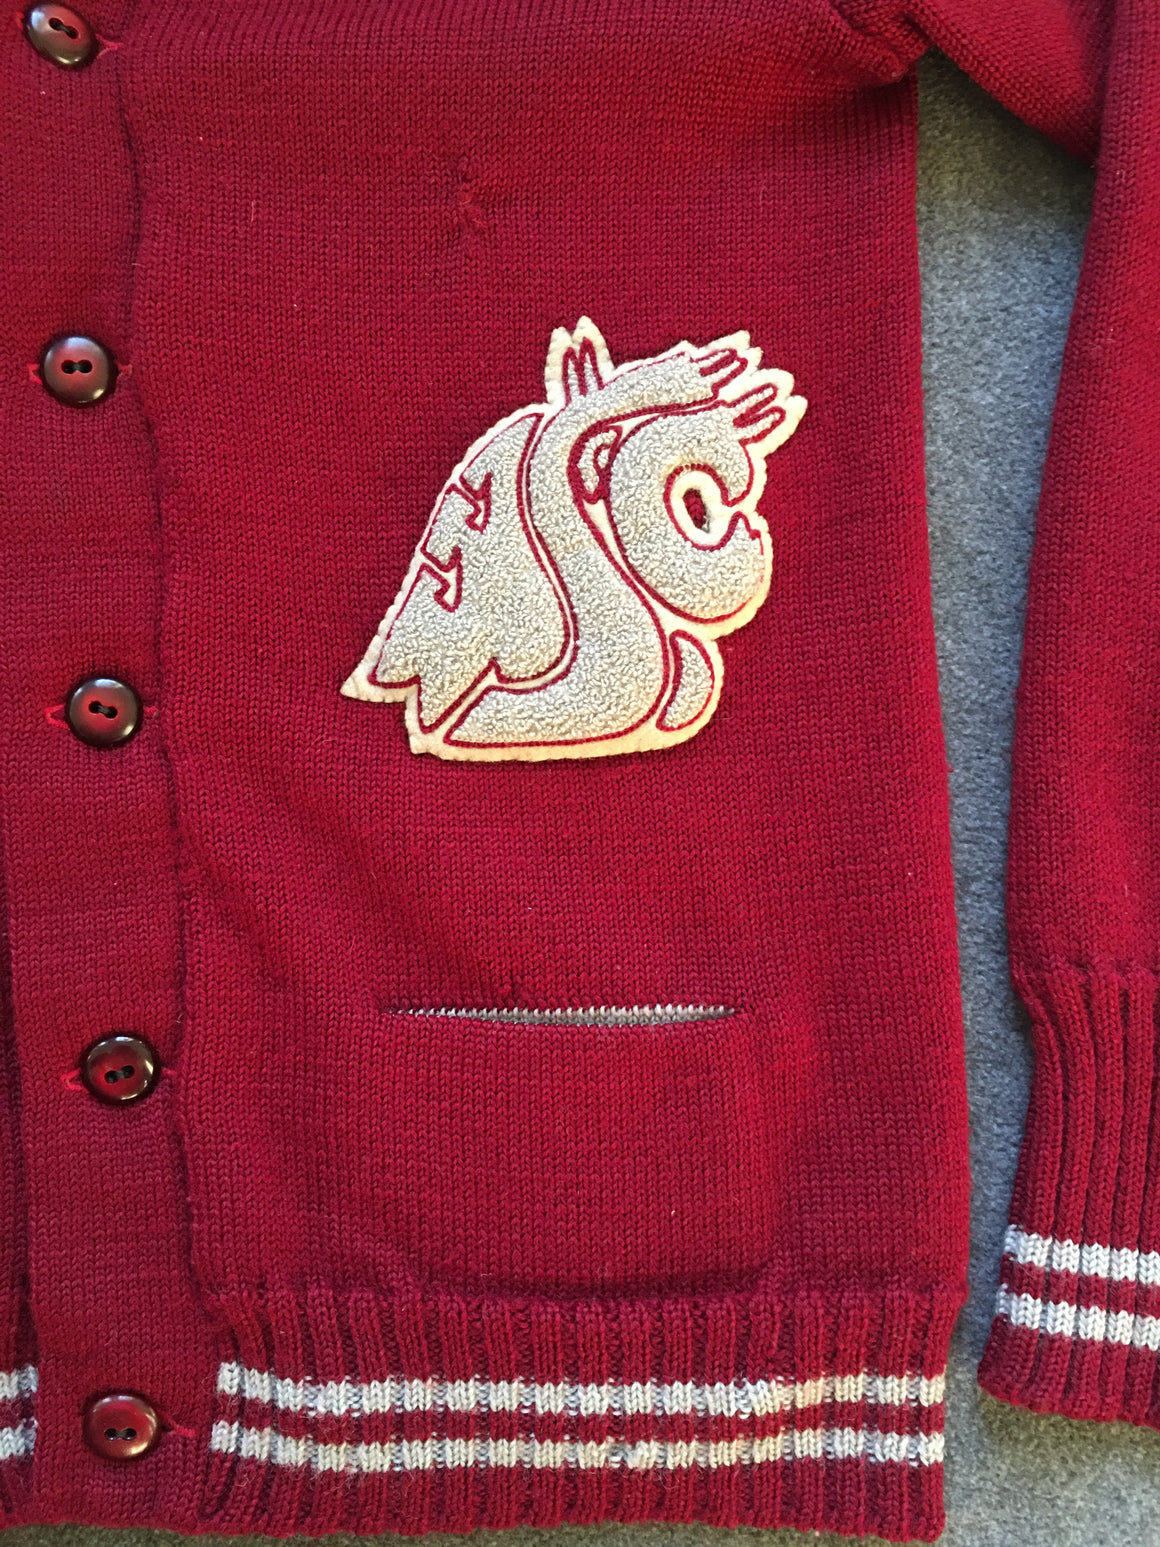 Washington State Cougars letter sweater - S